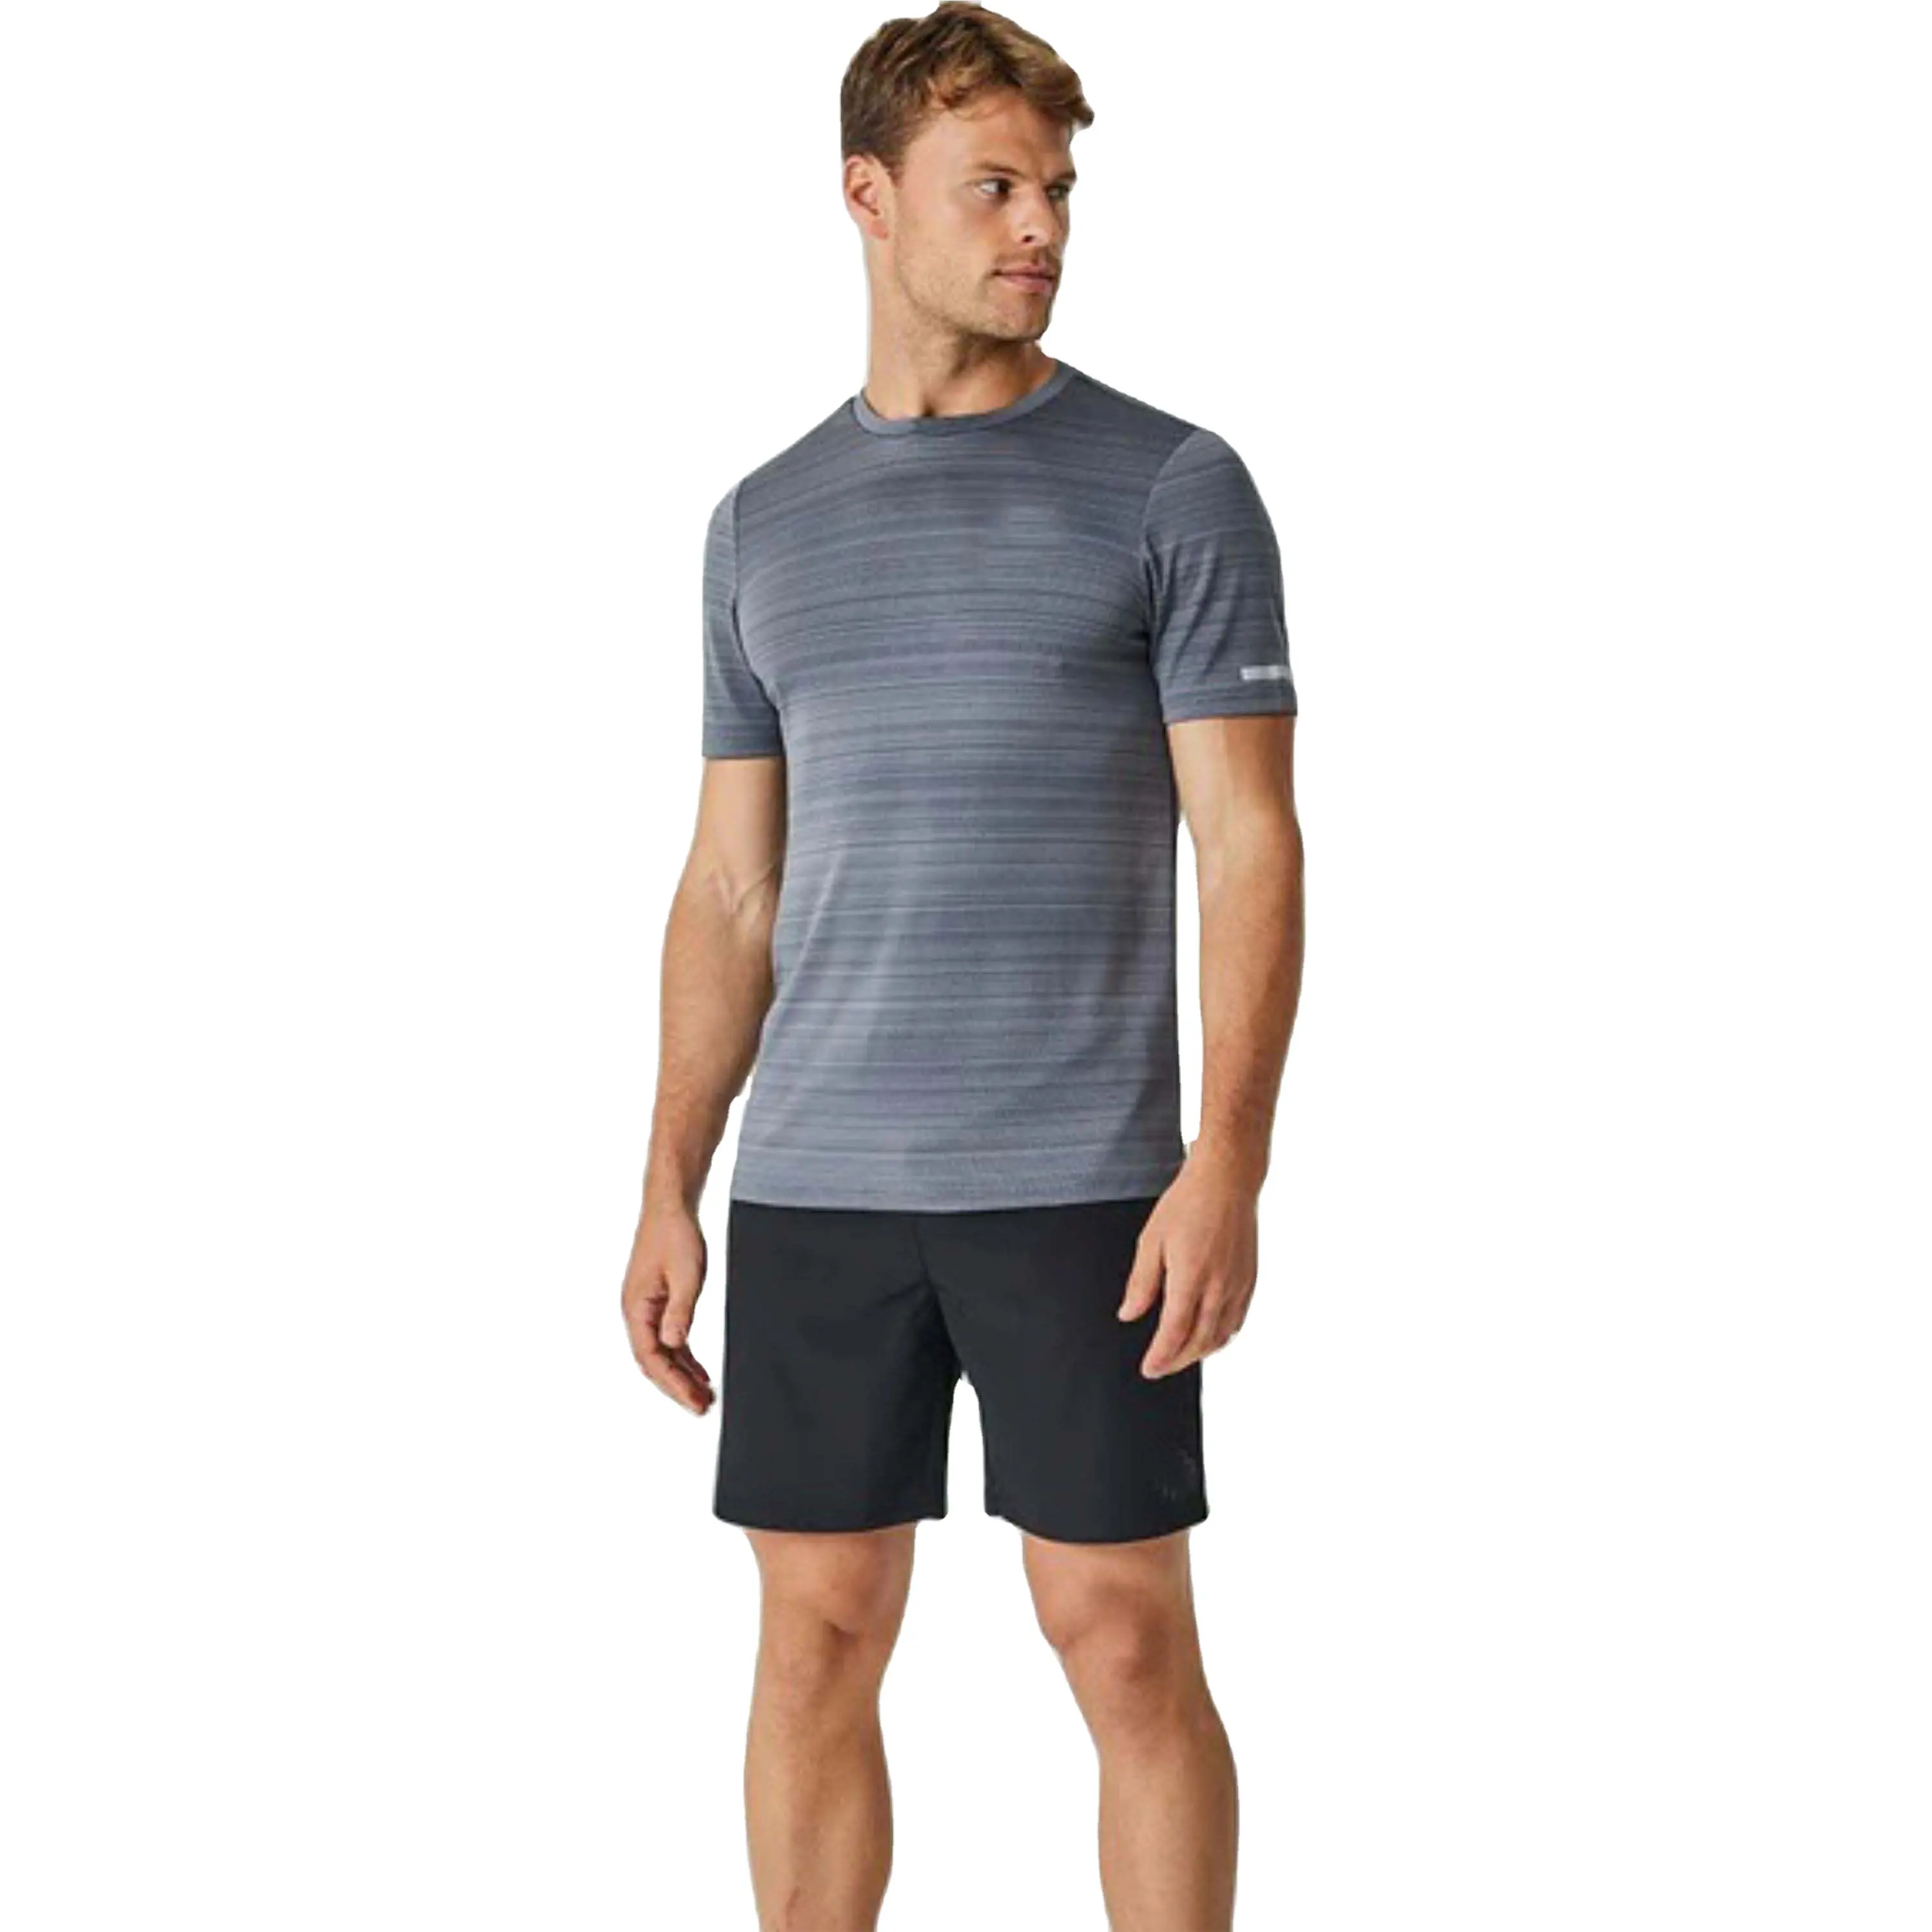 Premium Men's Training T-Shirt - Lightweight, Moisture-Wicking, and Ideal for Fitness Training, Exercise, and Athletic Wear